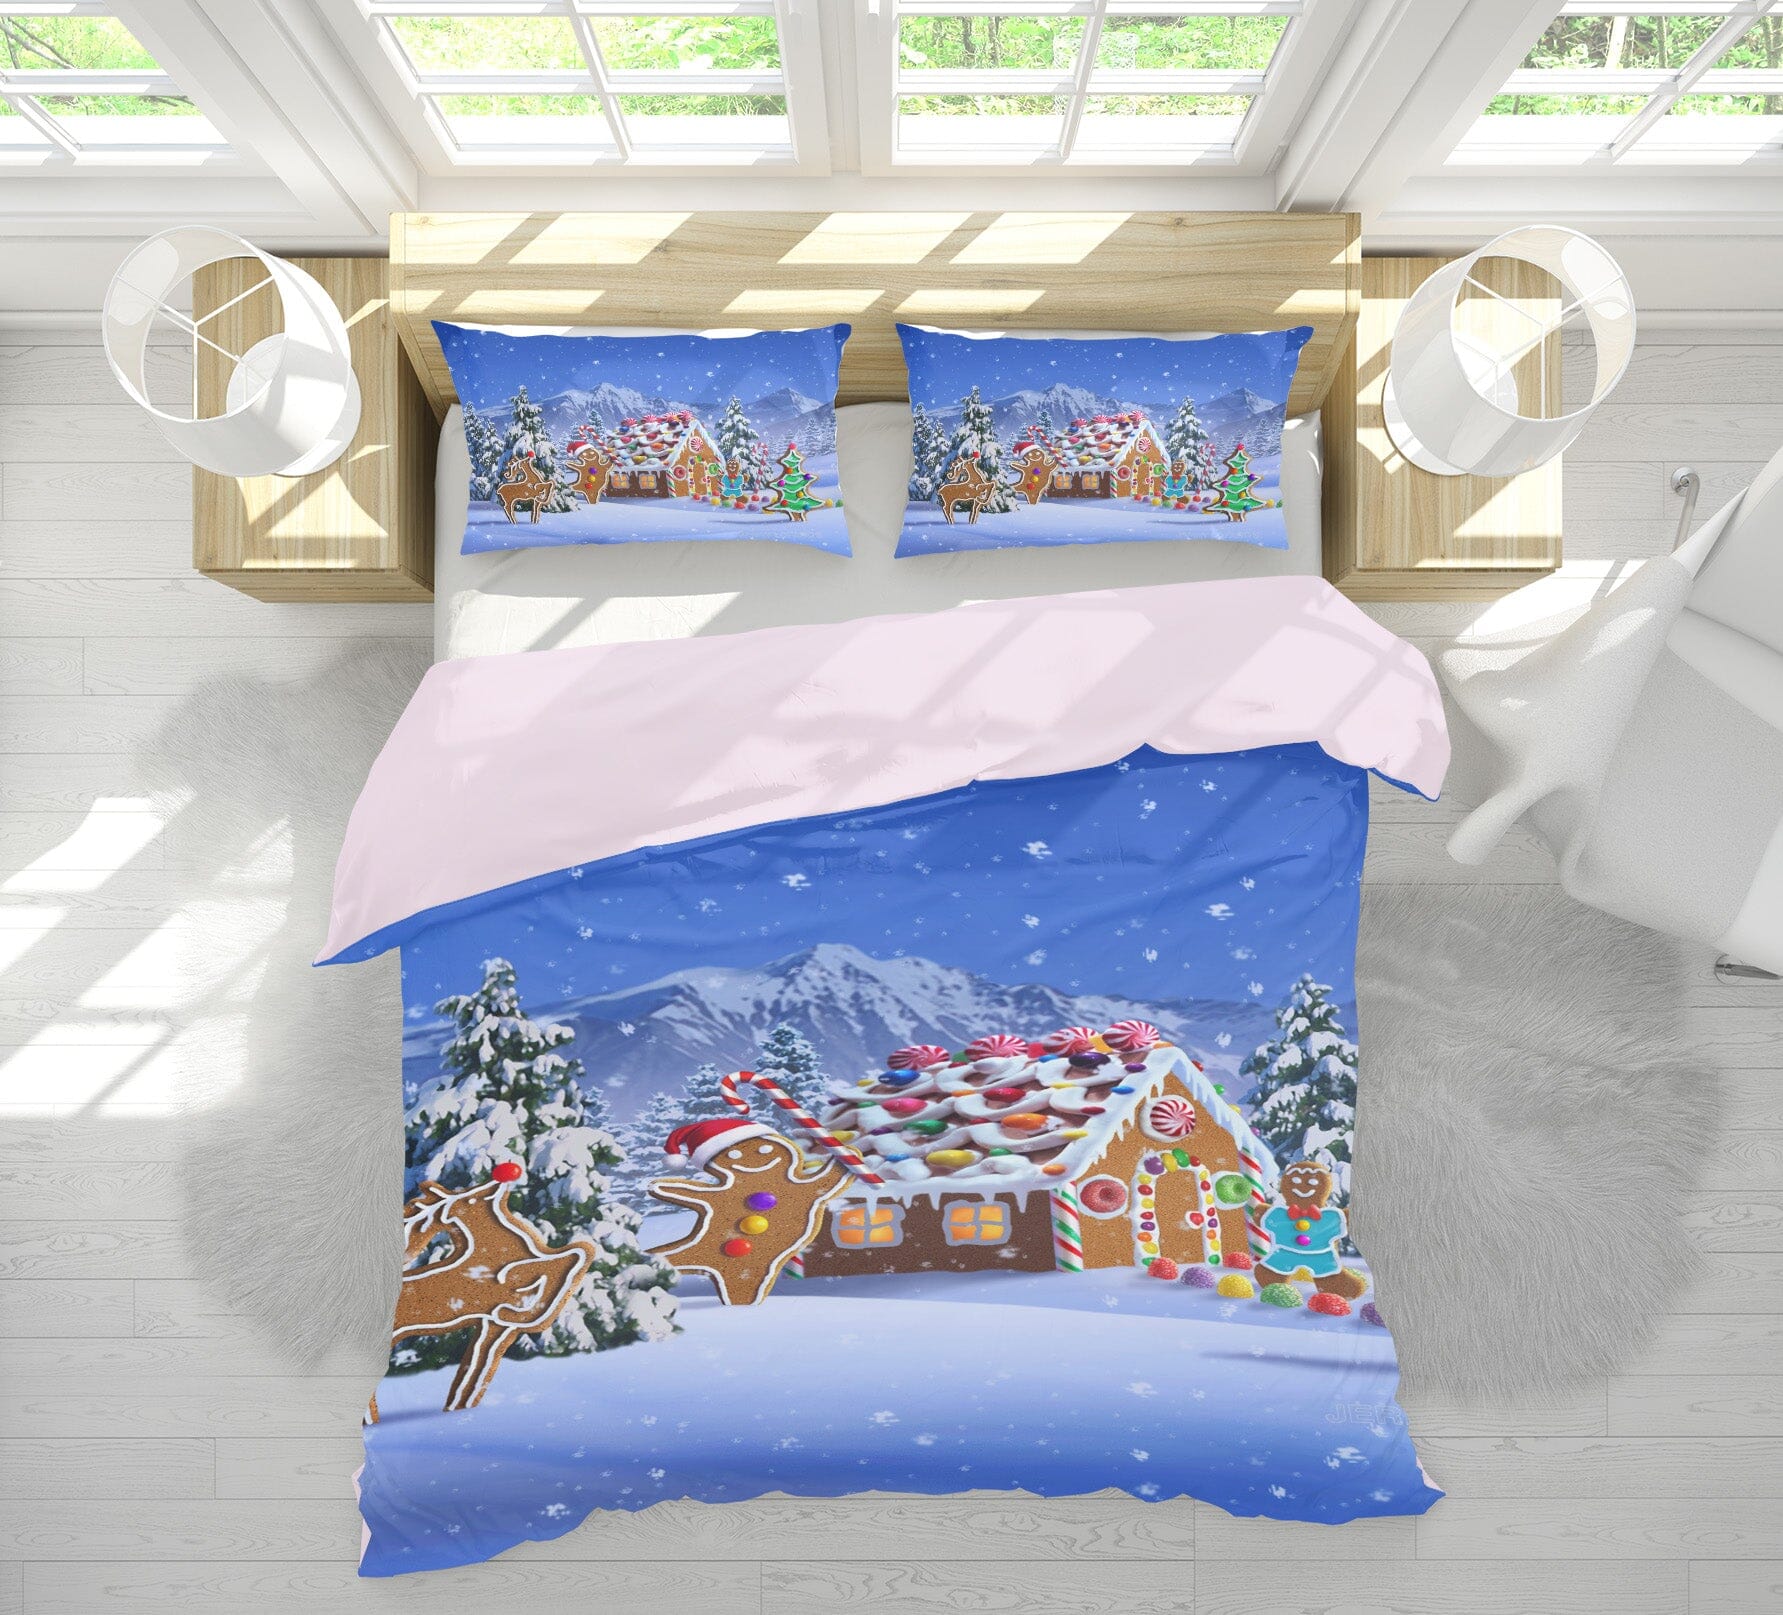 3D Gingerbread Fantasy 2122 Jerry LoFaro bedding Bed Pillowcases Quilt Quiet Covers AJ Creativity Home 